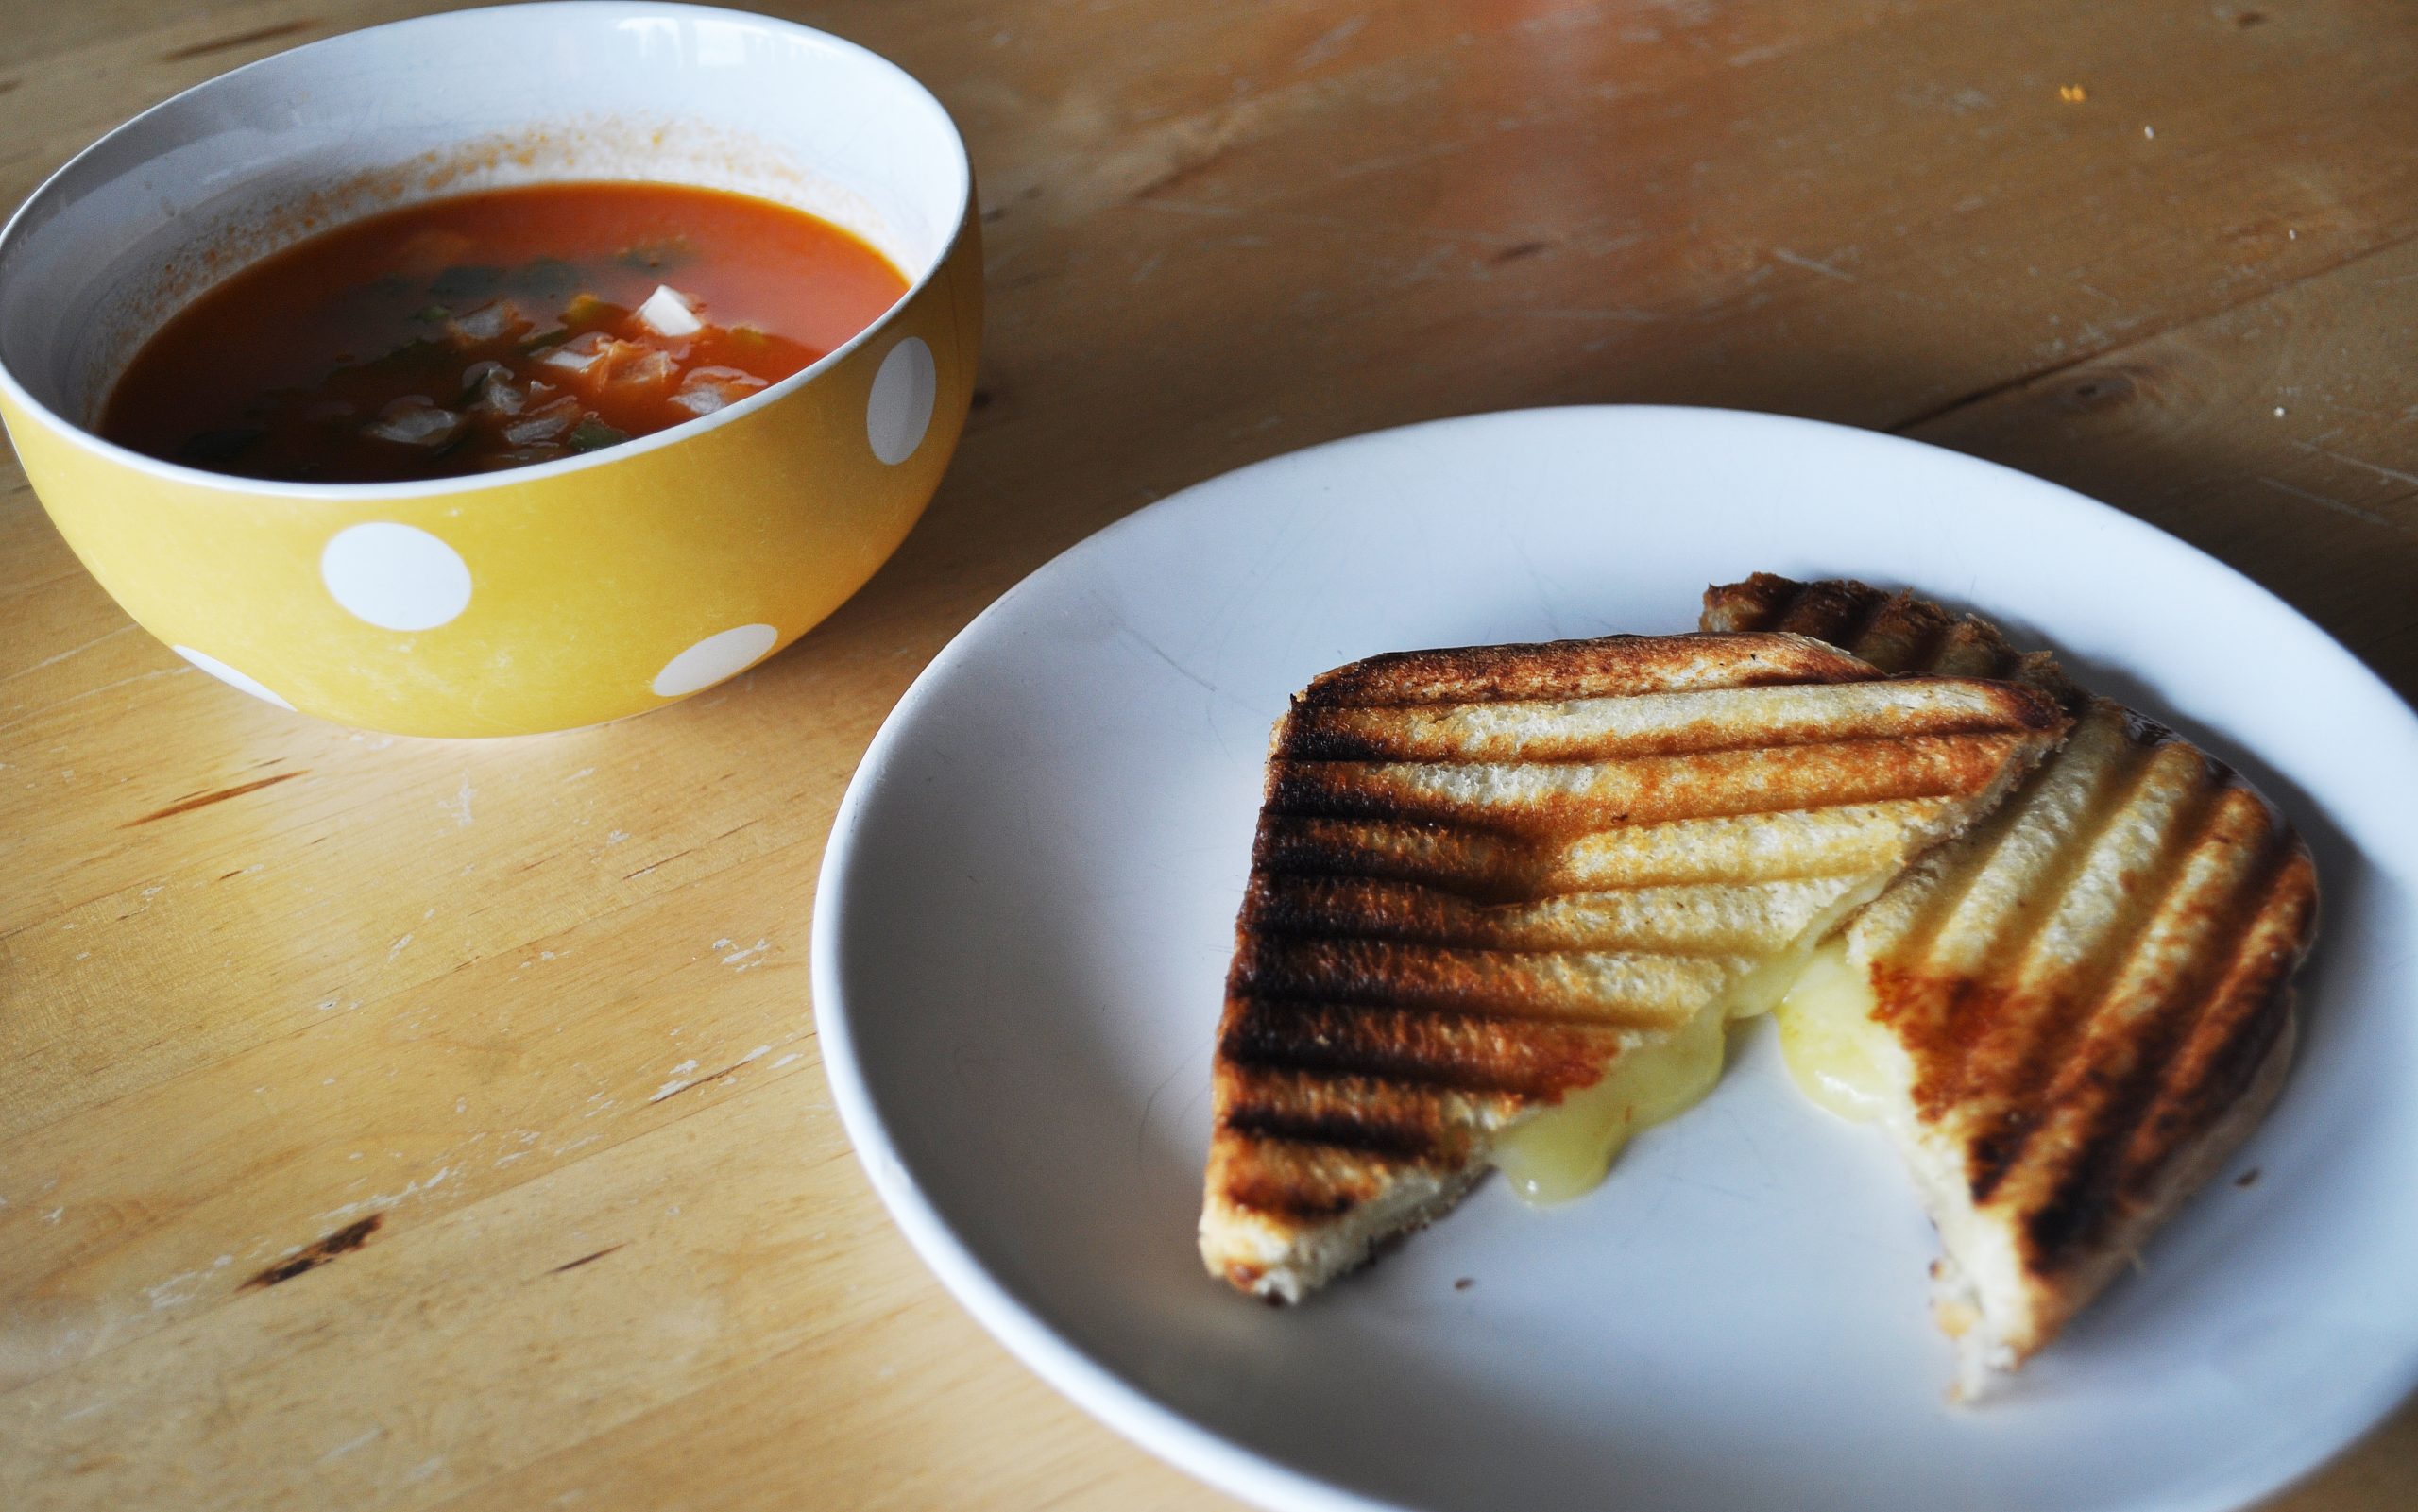 Celebrating National Grilled Cheese day… with Mahon cheese sandwich and gazpacho